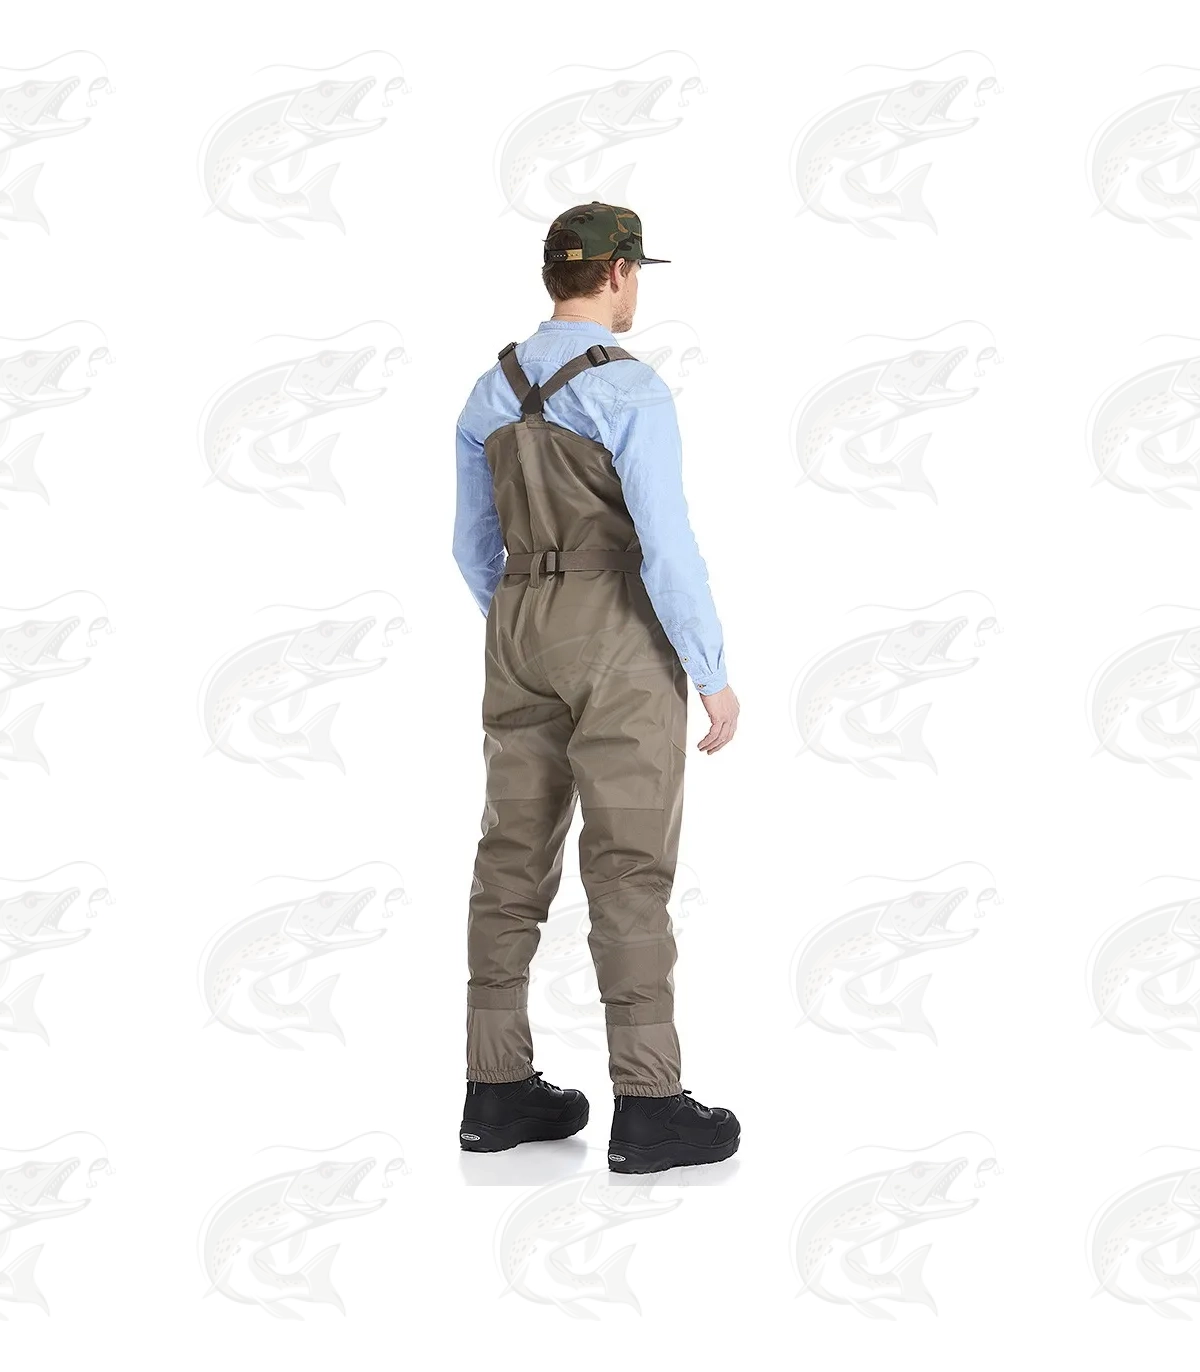 Vision NEW ATOM Stockingfoot Breathable Chest Waders Highest Quality Great Value 